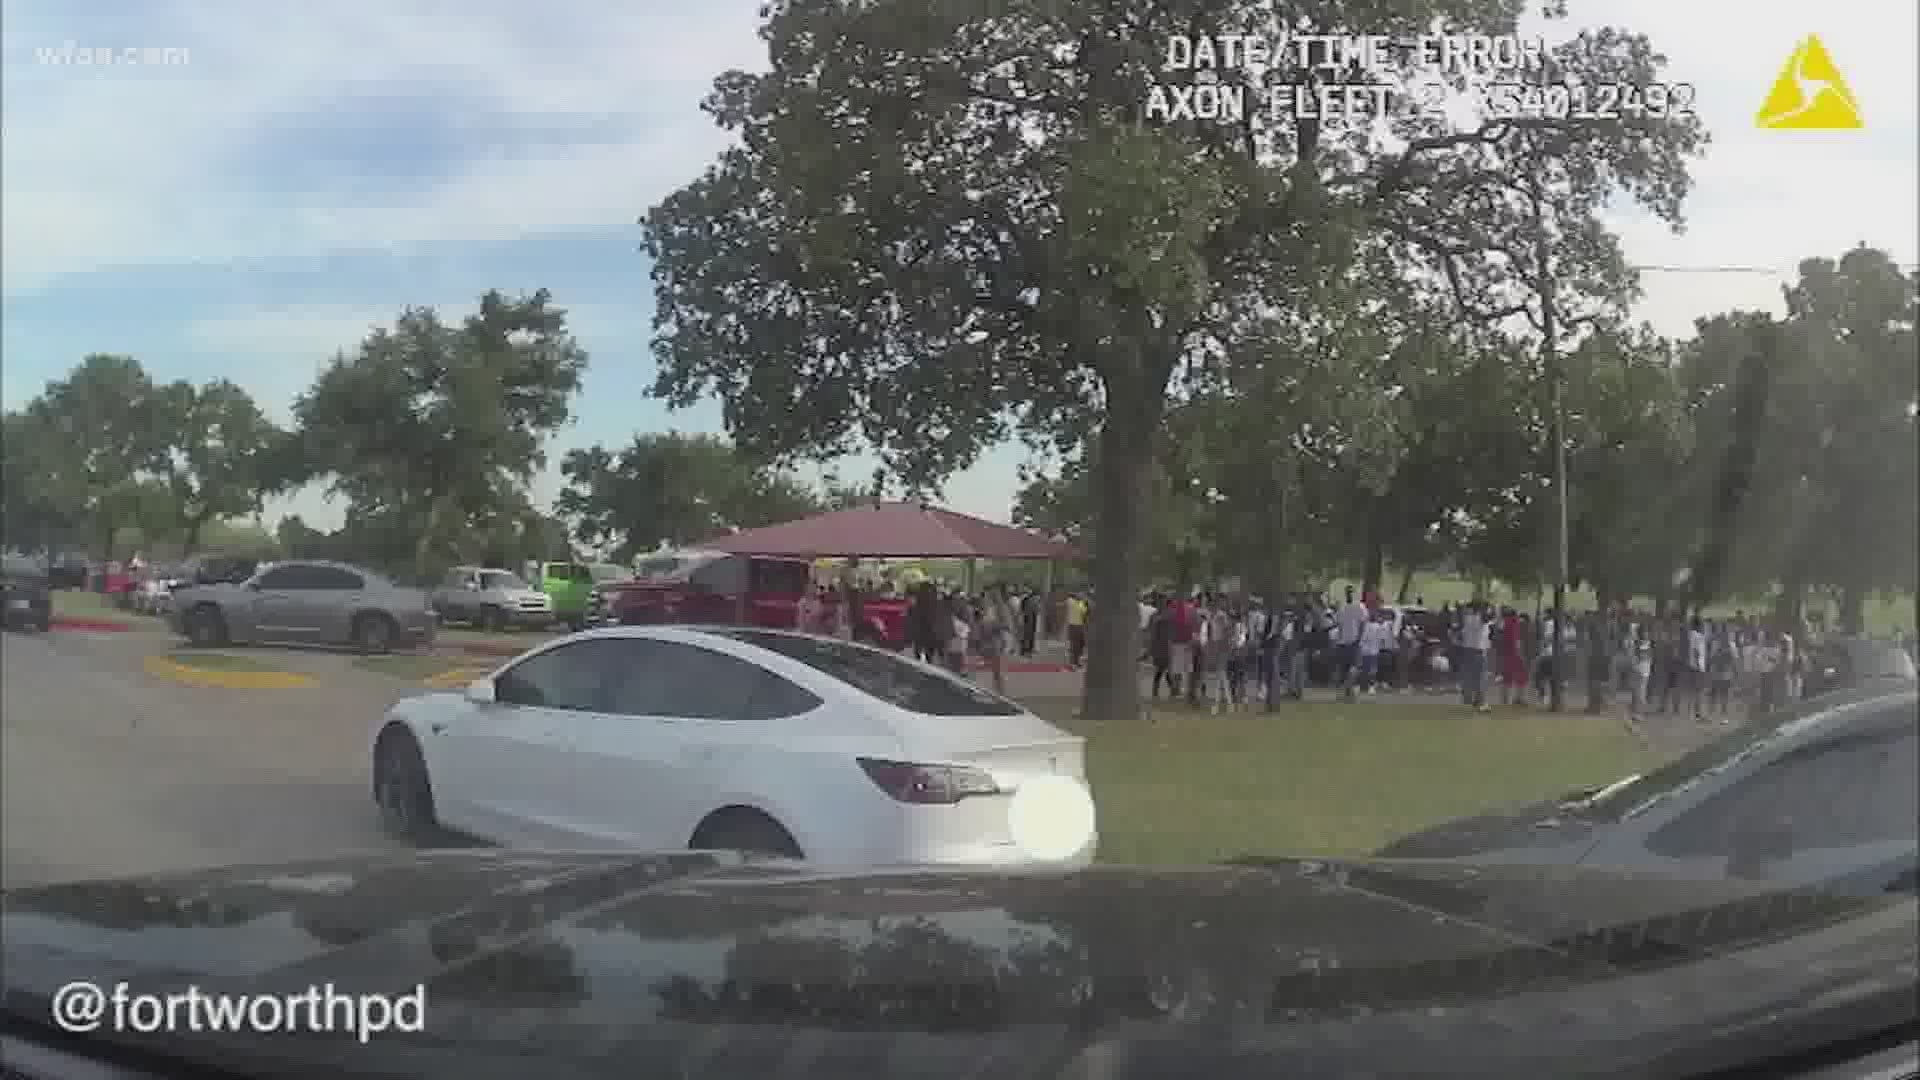 Fort Worth police said Monday they attempted to stop people from drinking alcohol, riding ATVs and gathering in large numbers in Village Creek Park Sunday.